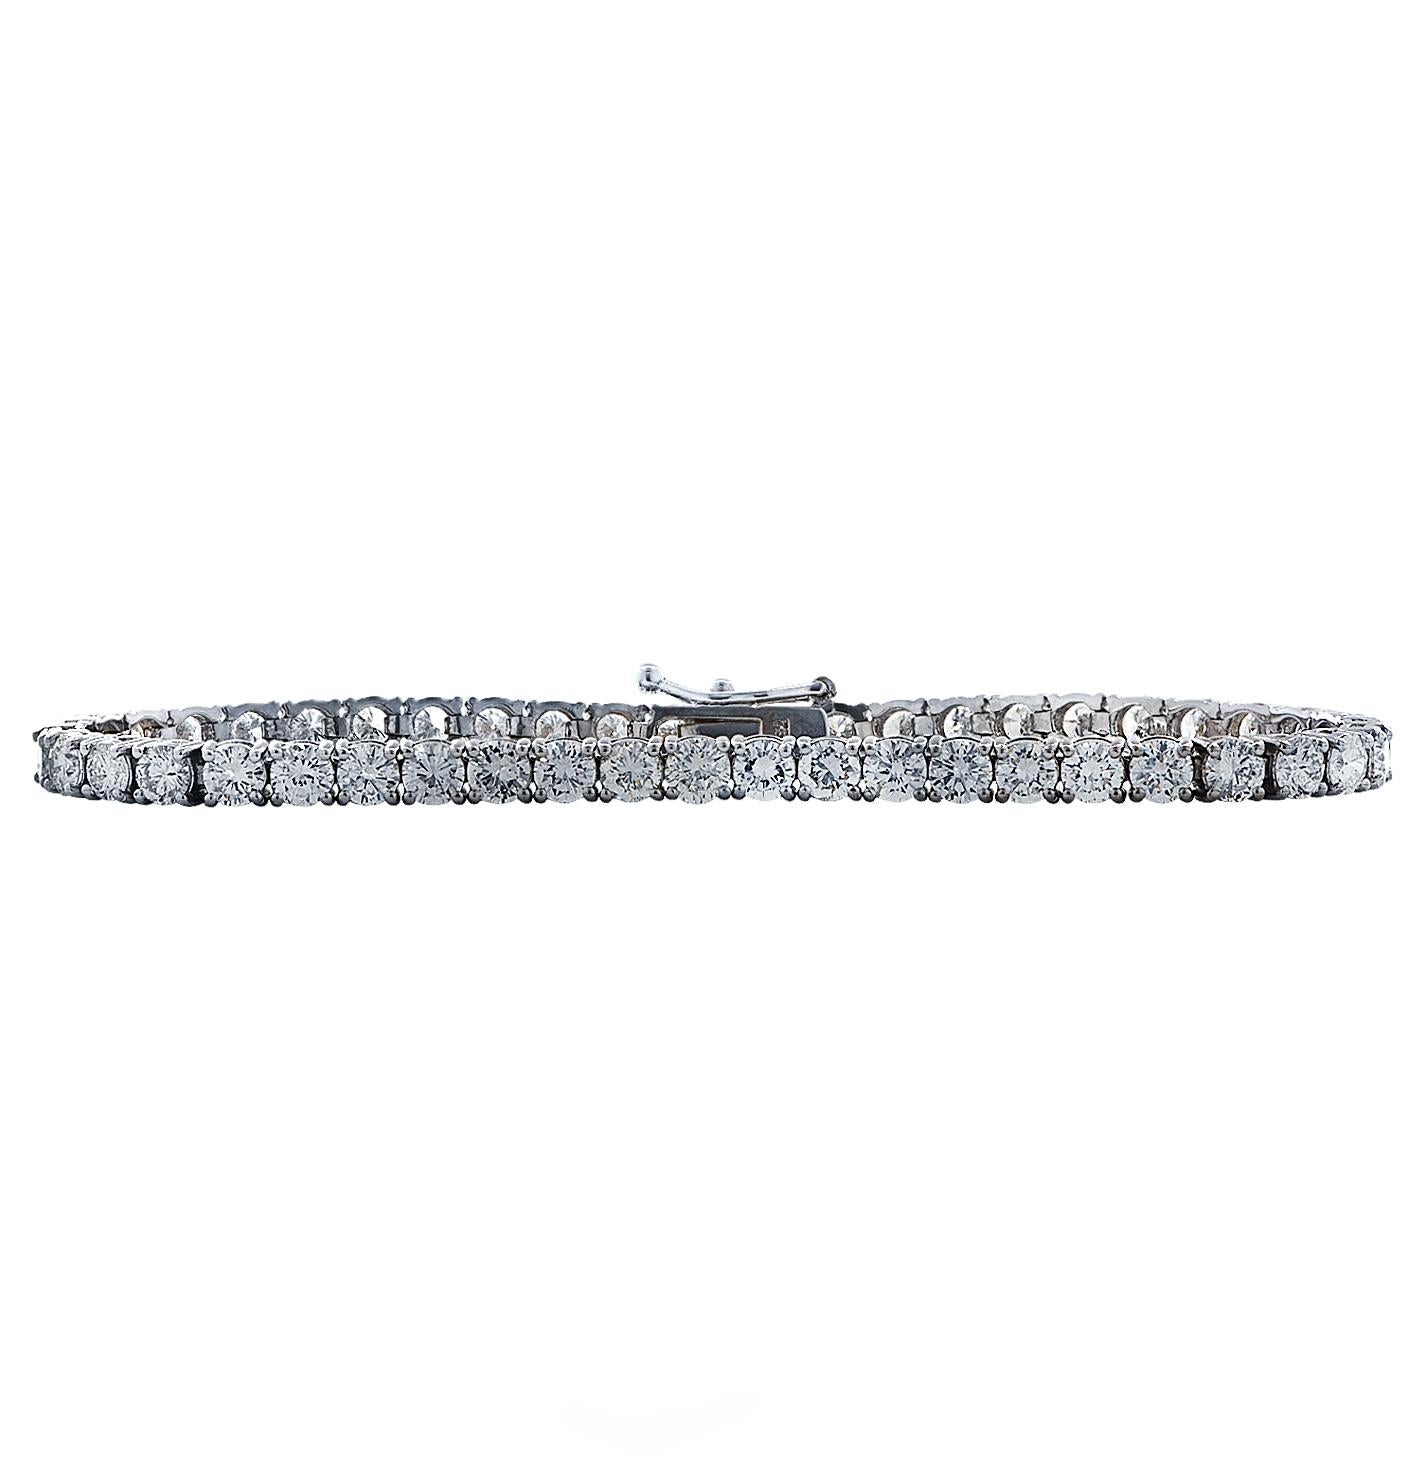 Exquisite diamond tennis bracelet crafted in 18 karat white gold, showcasing 47 round brilliant cut diamonds weighing approximately 7.65 carats total, G-H color, VS-SI clarity, set in a seamless eternity of diamonds, creating a spectacular symphony